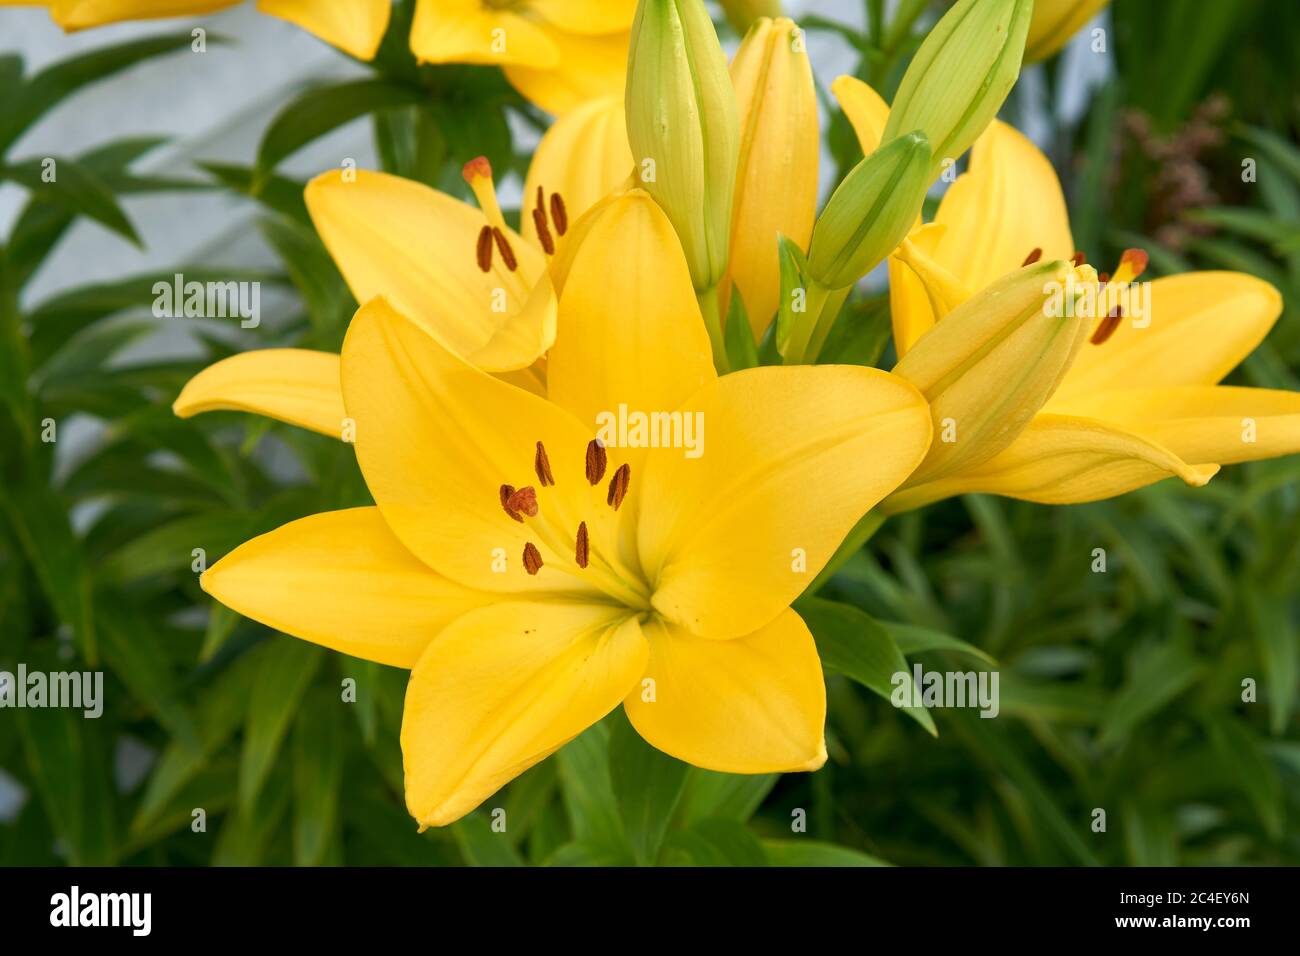 Closeup Of A Yellow Asiatic Lily Flower Lilium Species Blooming In Early Summer Stock Photo Alamy